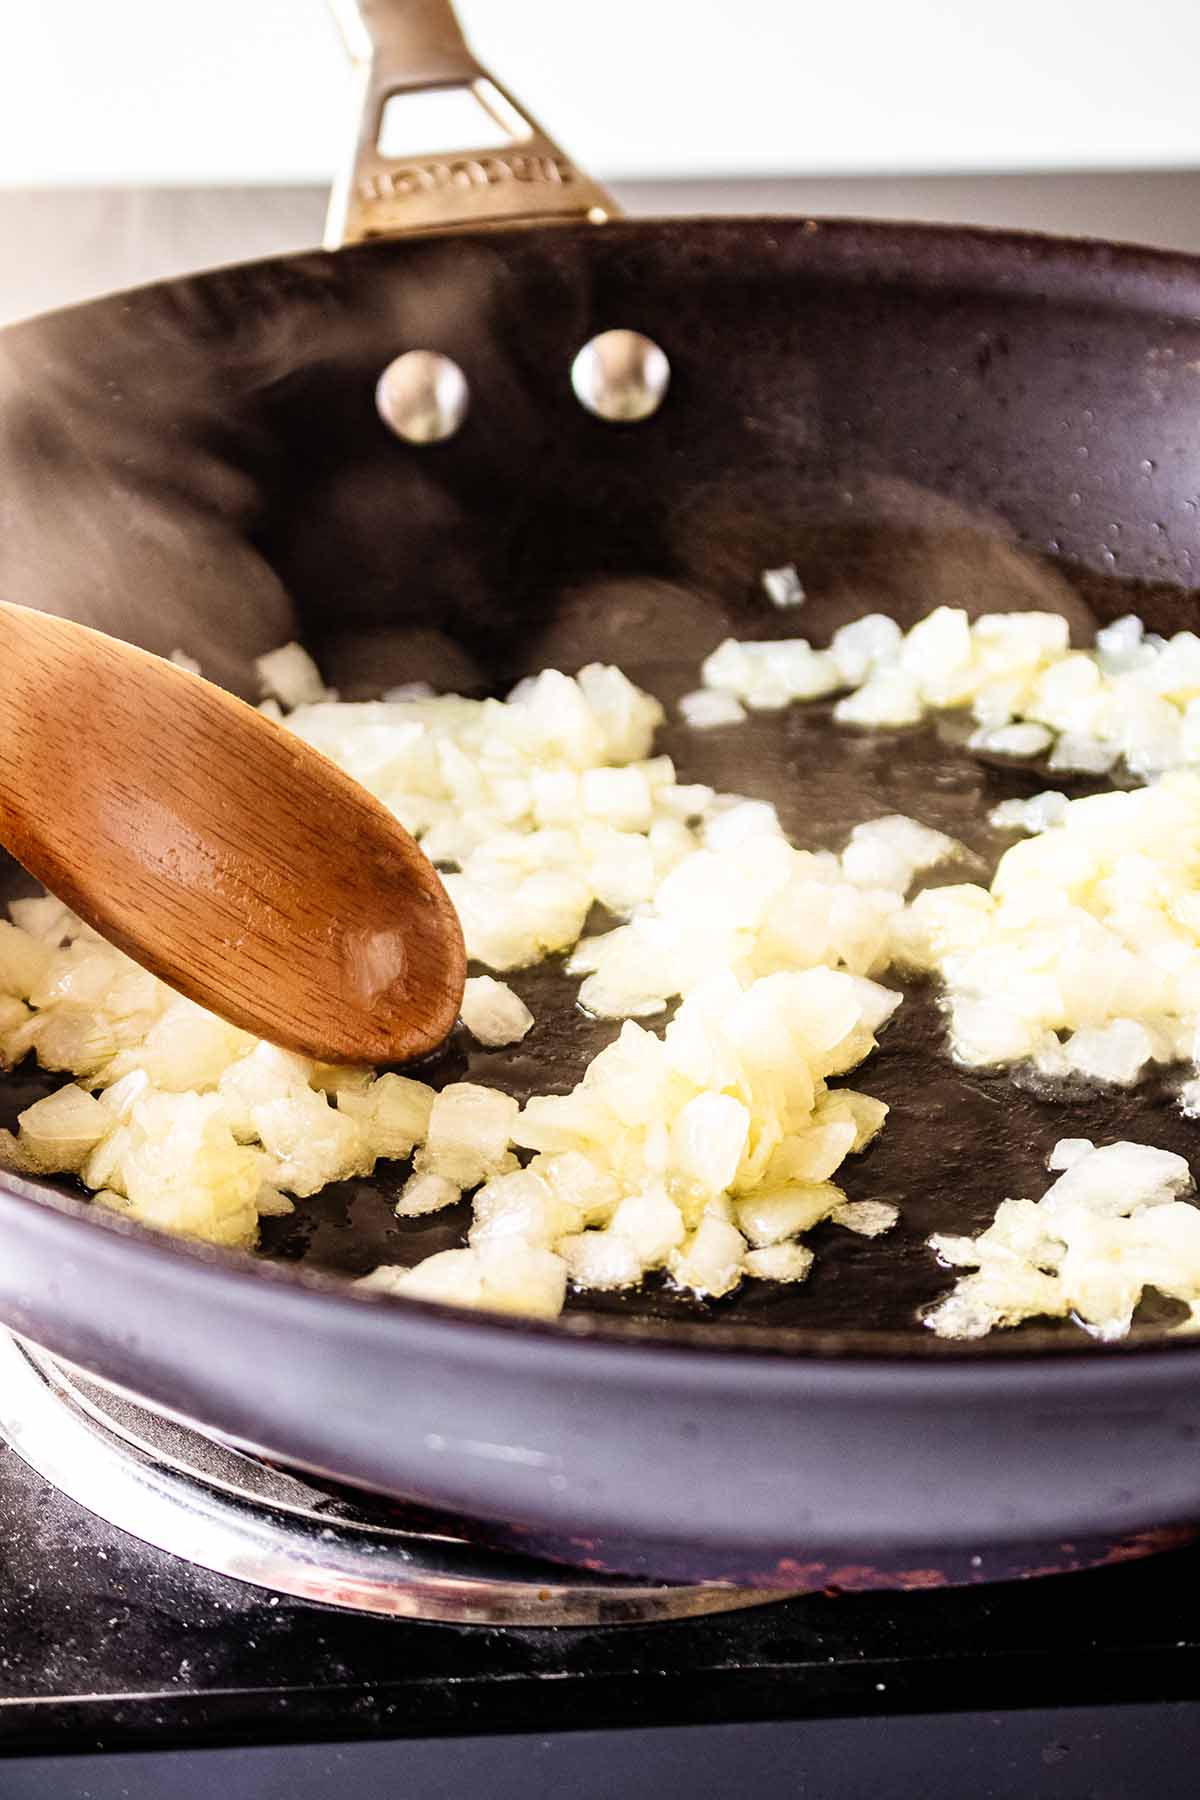 Chopped onion cooking in a skillet with a wooden spoon.